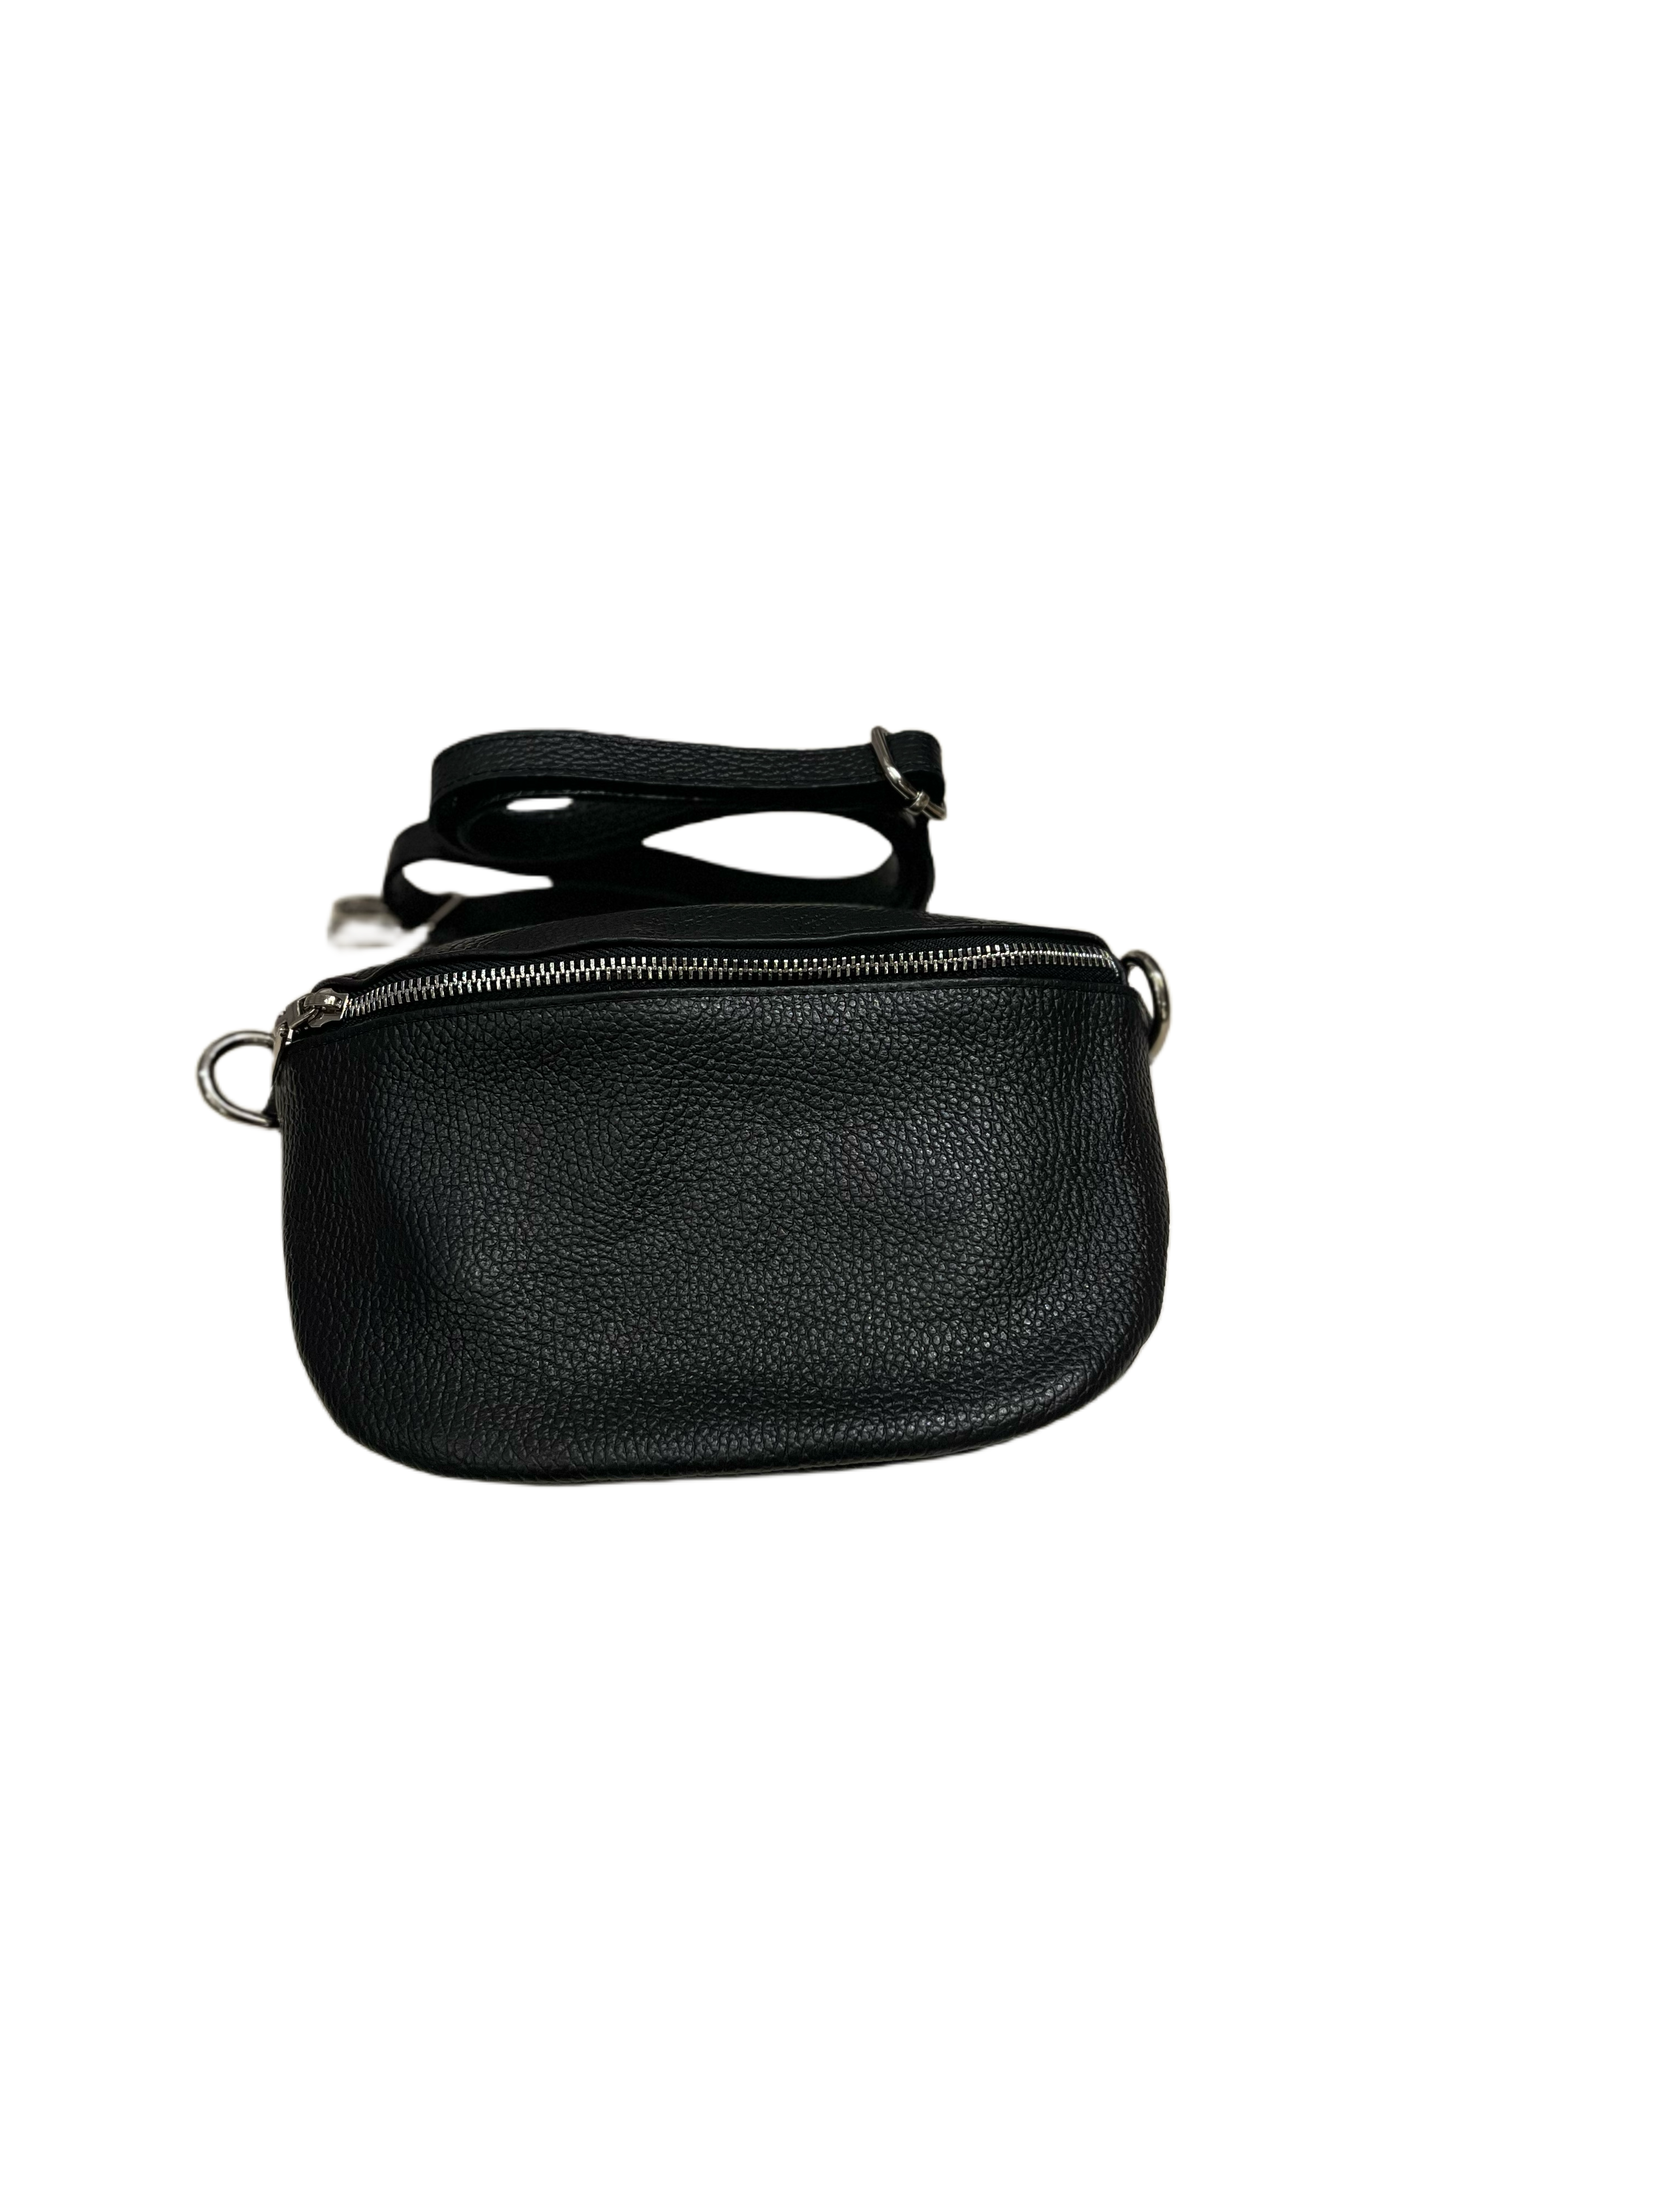 Bodella Black Large Genuine Leather Hip Bags- Made in Italy